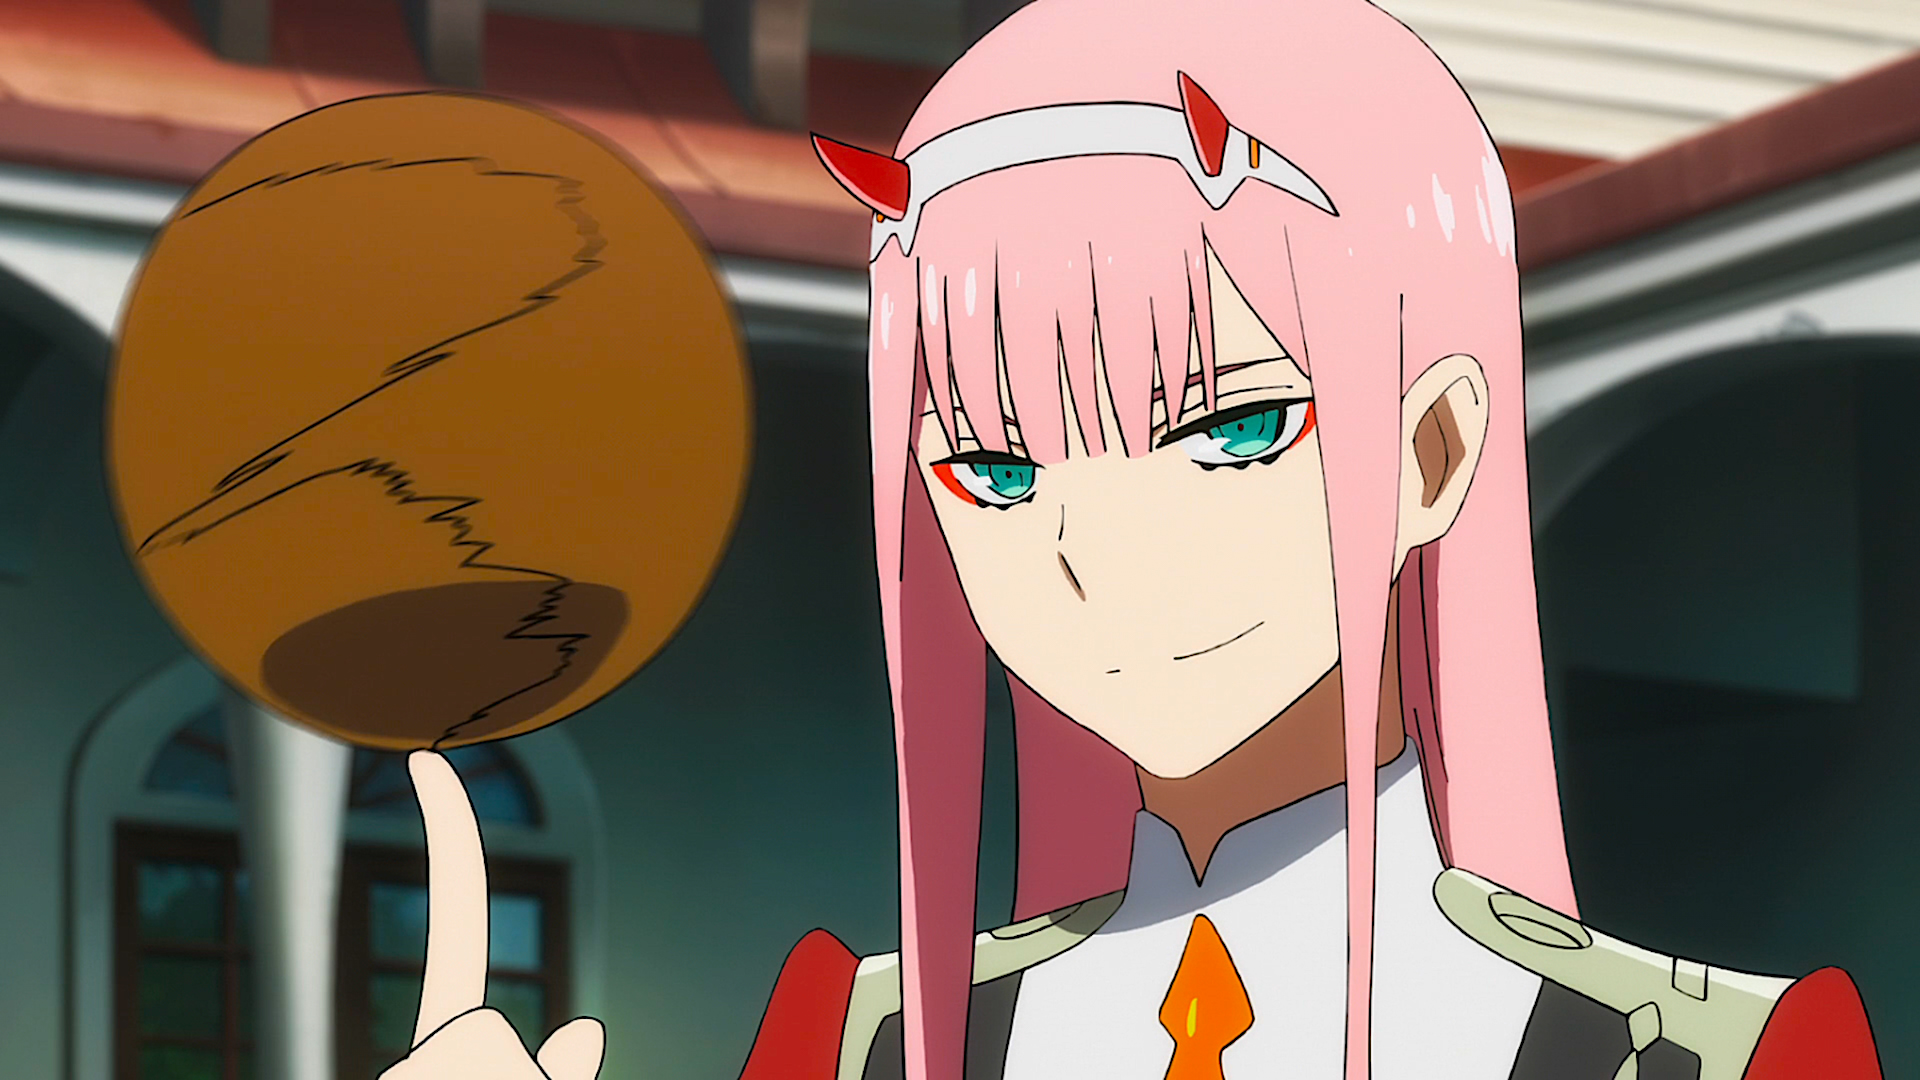 Darling In The FranXX Zero Two Hiro Zero Two Rotaing Ball On A Finger With Wallpaper Of Home And Window 2K Anime